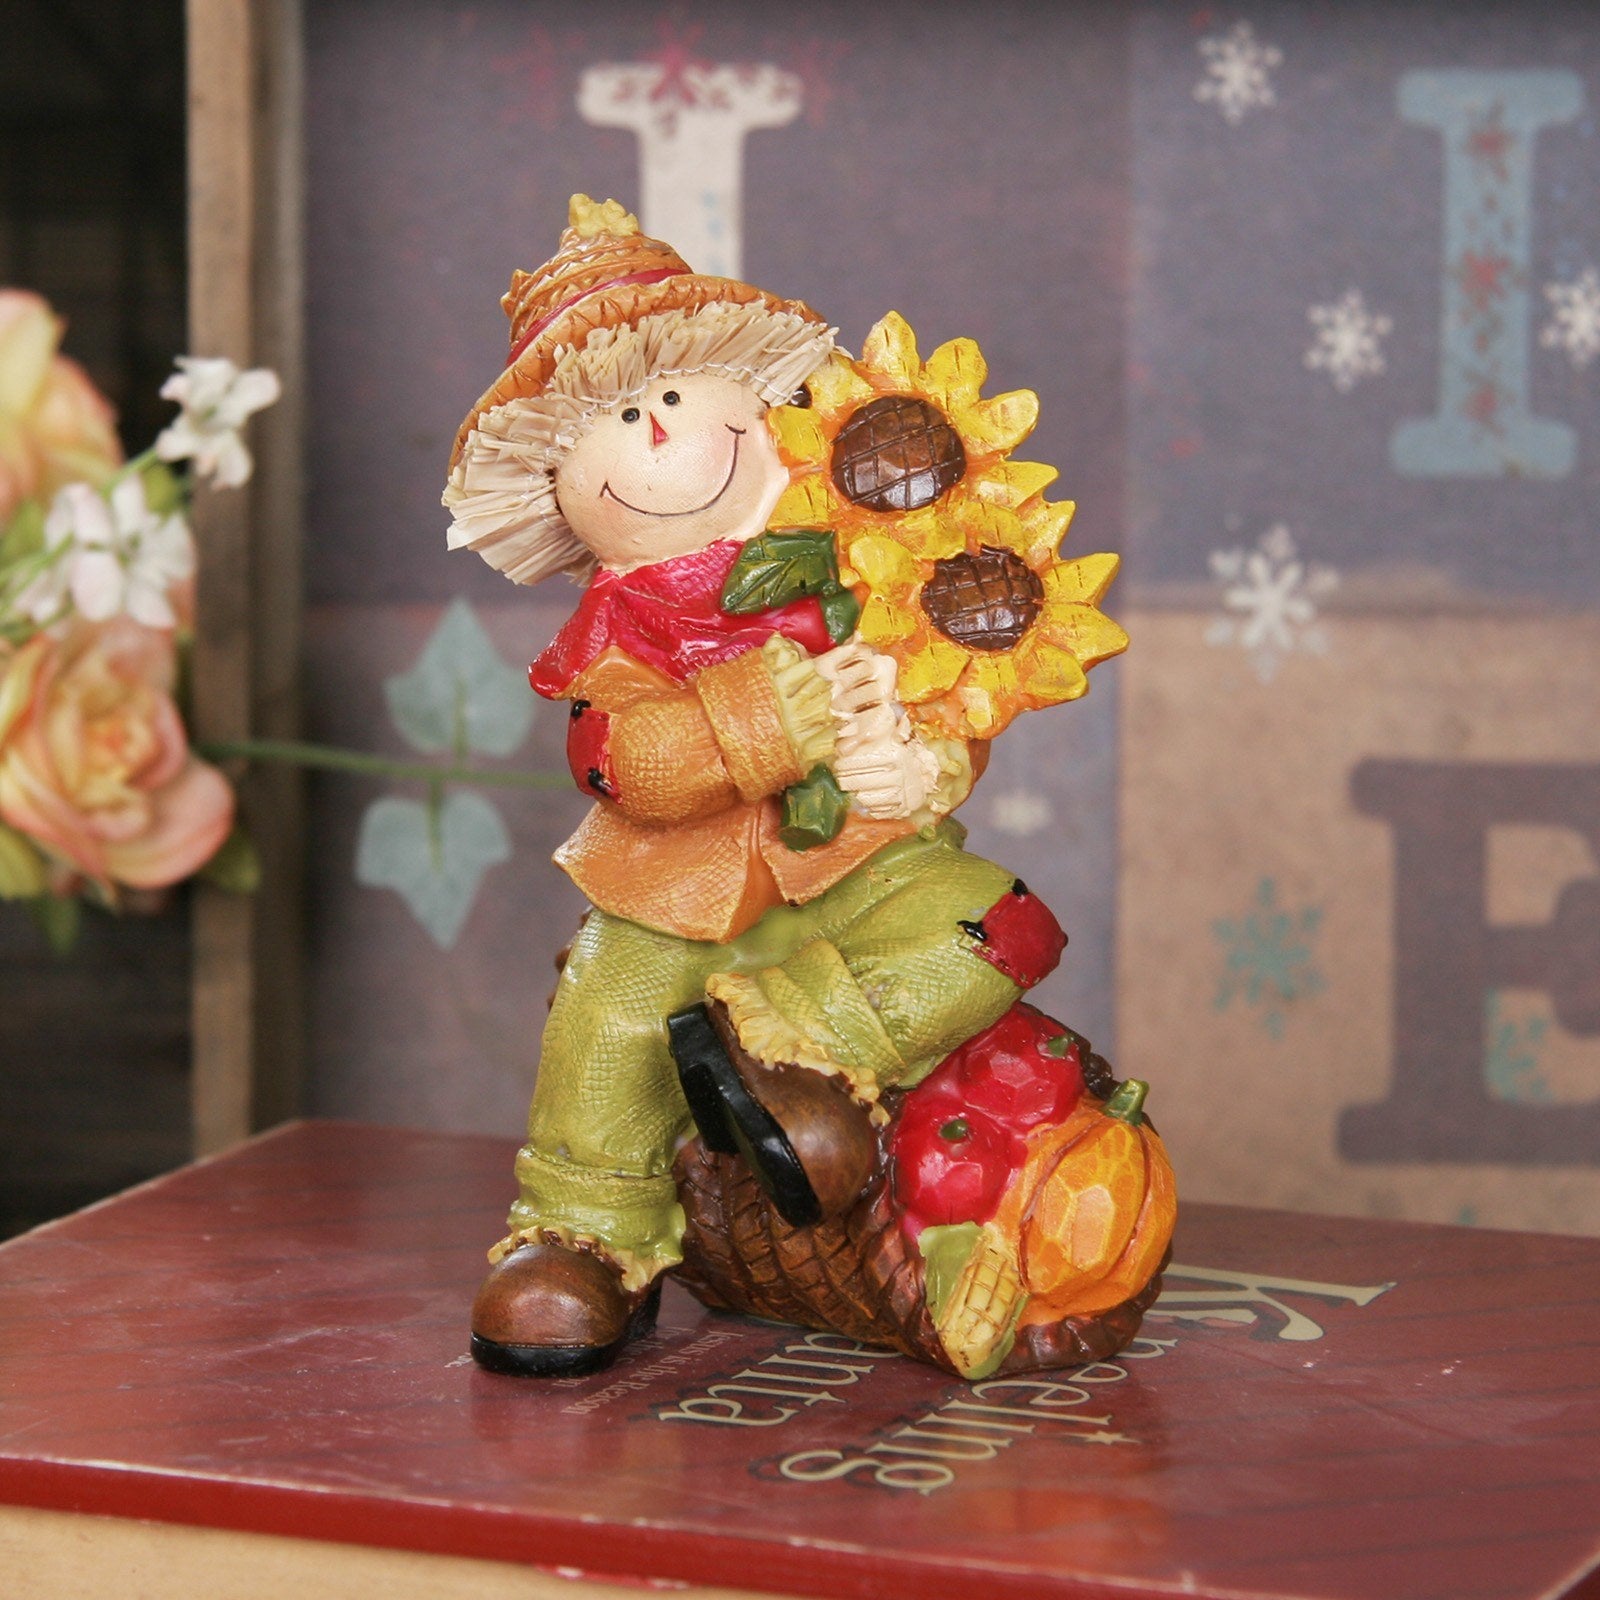 This harvest boy figurine is so cute and so sweet for thanksgiving